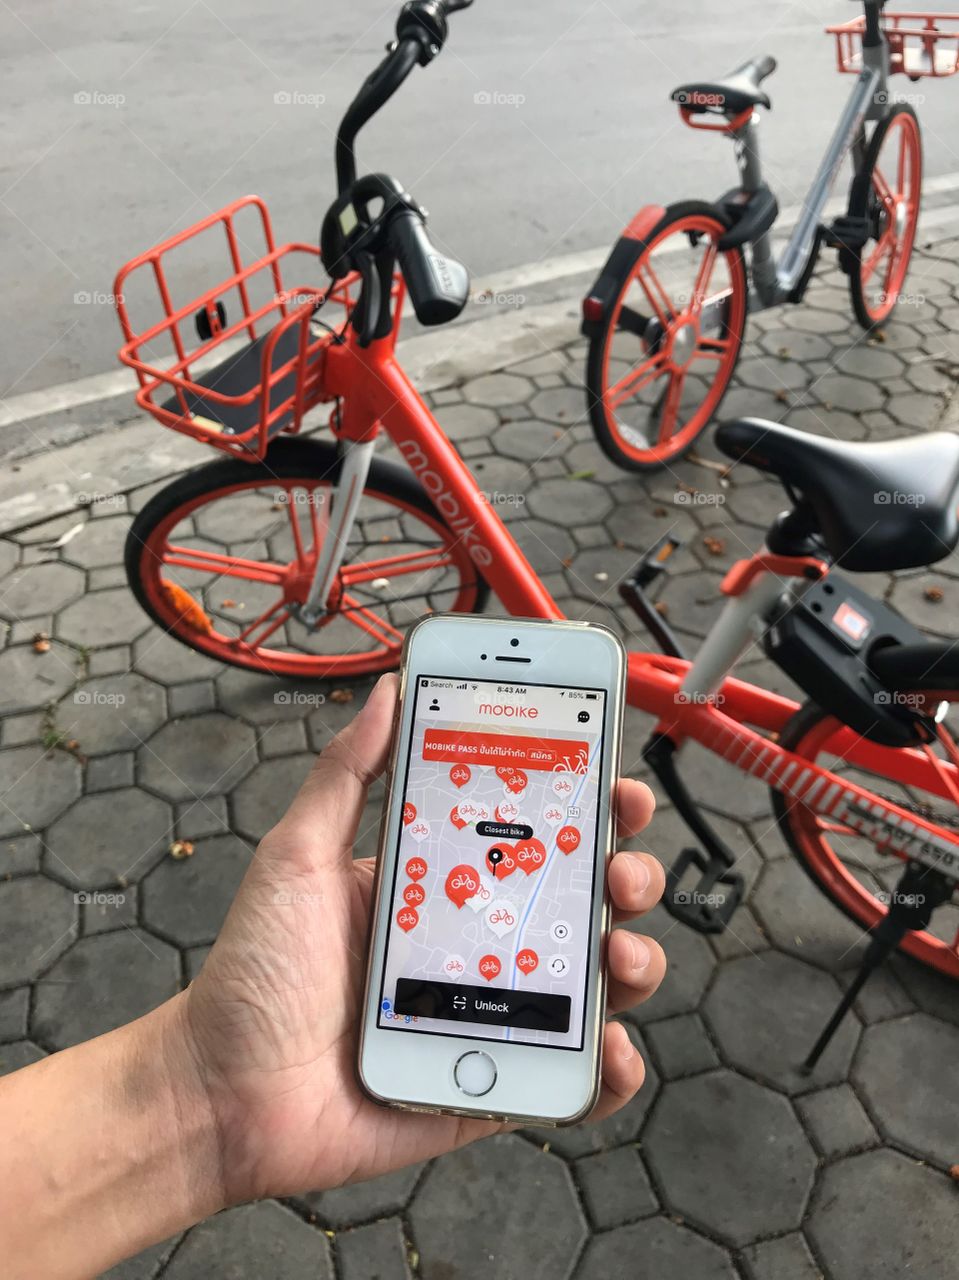 user is using application on iPhone for “mobike” rental bicycle which parks on footpath beside road, Chiang Mai, Thailand